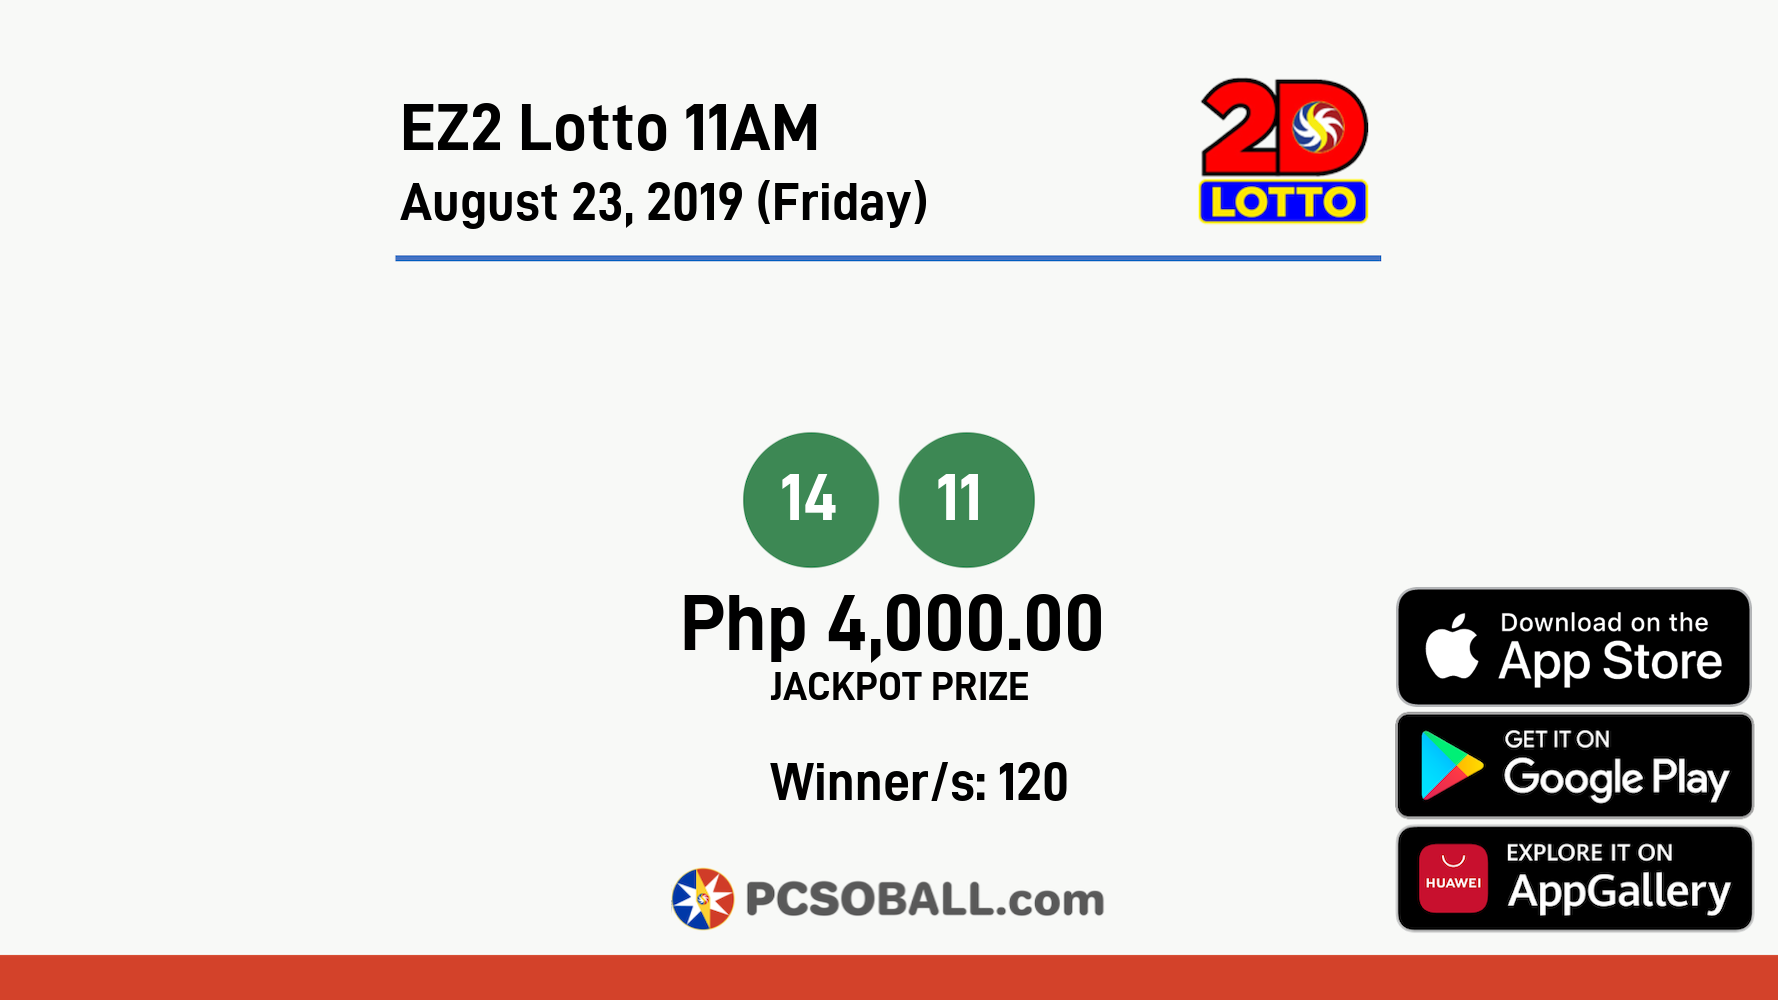 EZ2 Lotto 11AM August 23, 2019 (Friday) Result